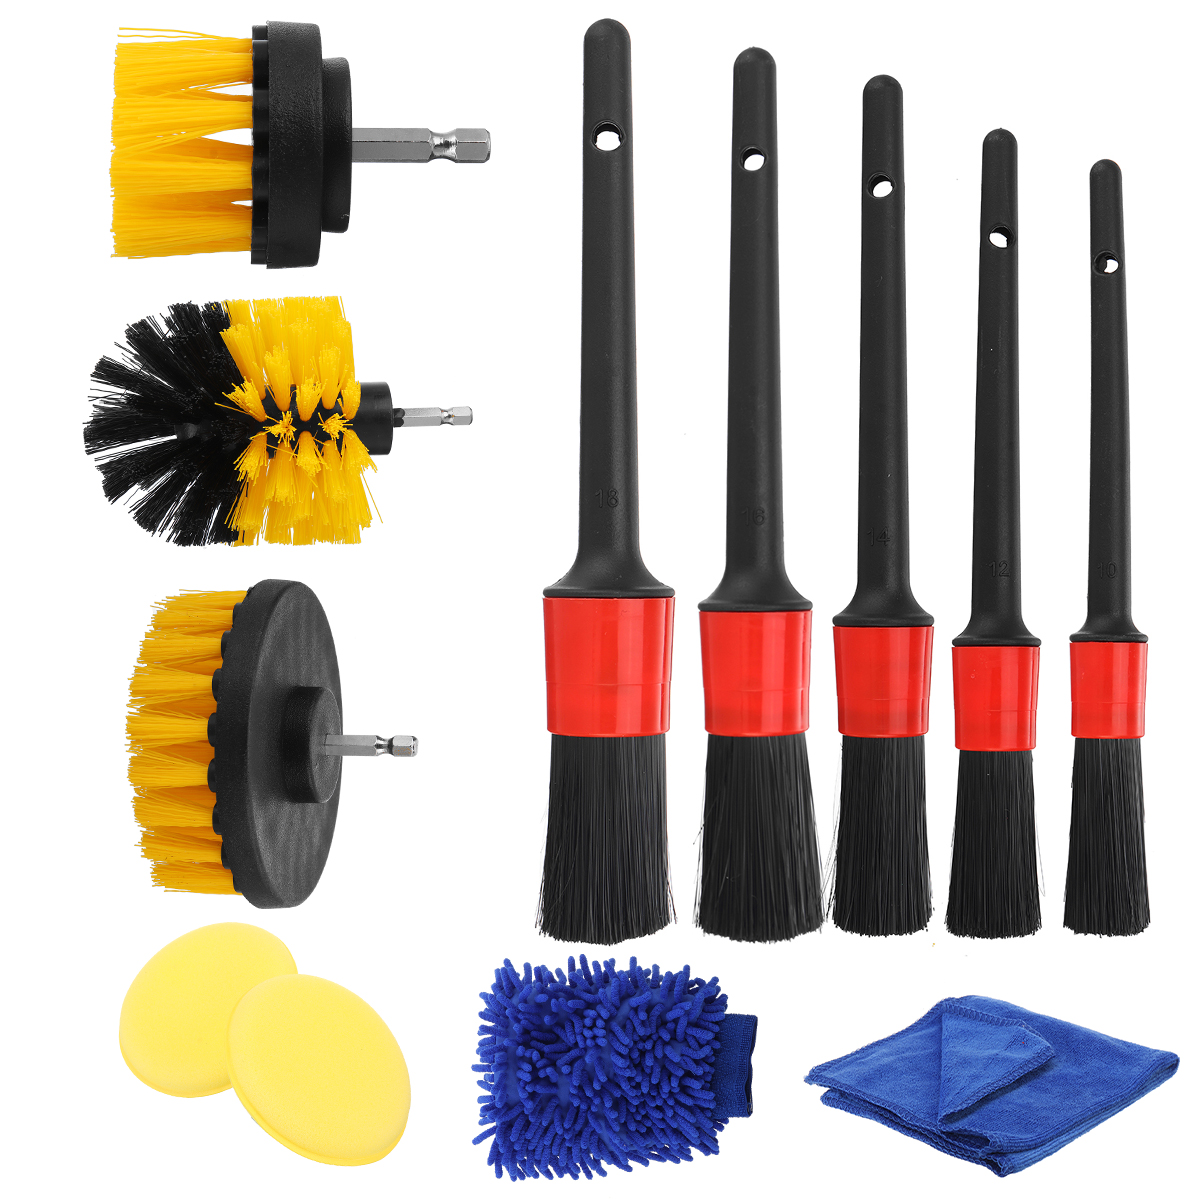 12PCS Cleaning Detailing Brush Set Dirt Dust Clean Brush for Car Motorcycle Air Vents